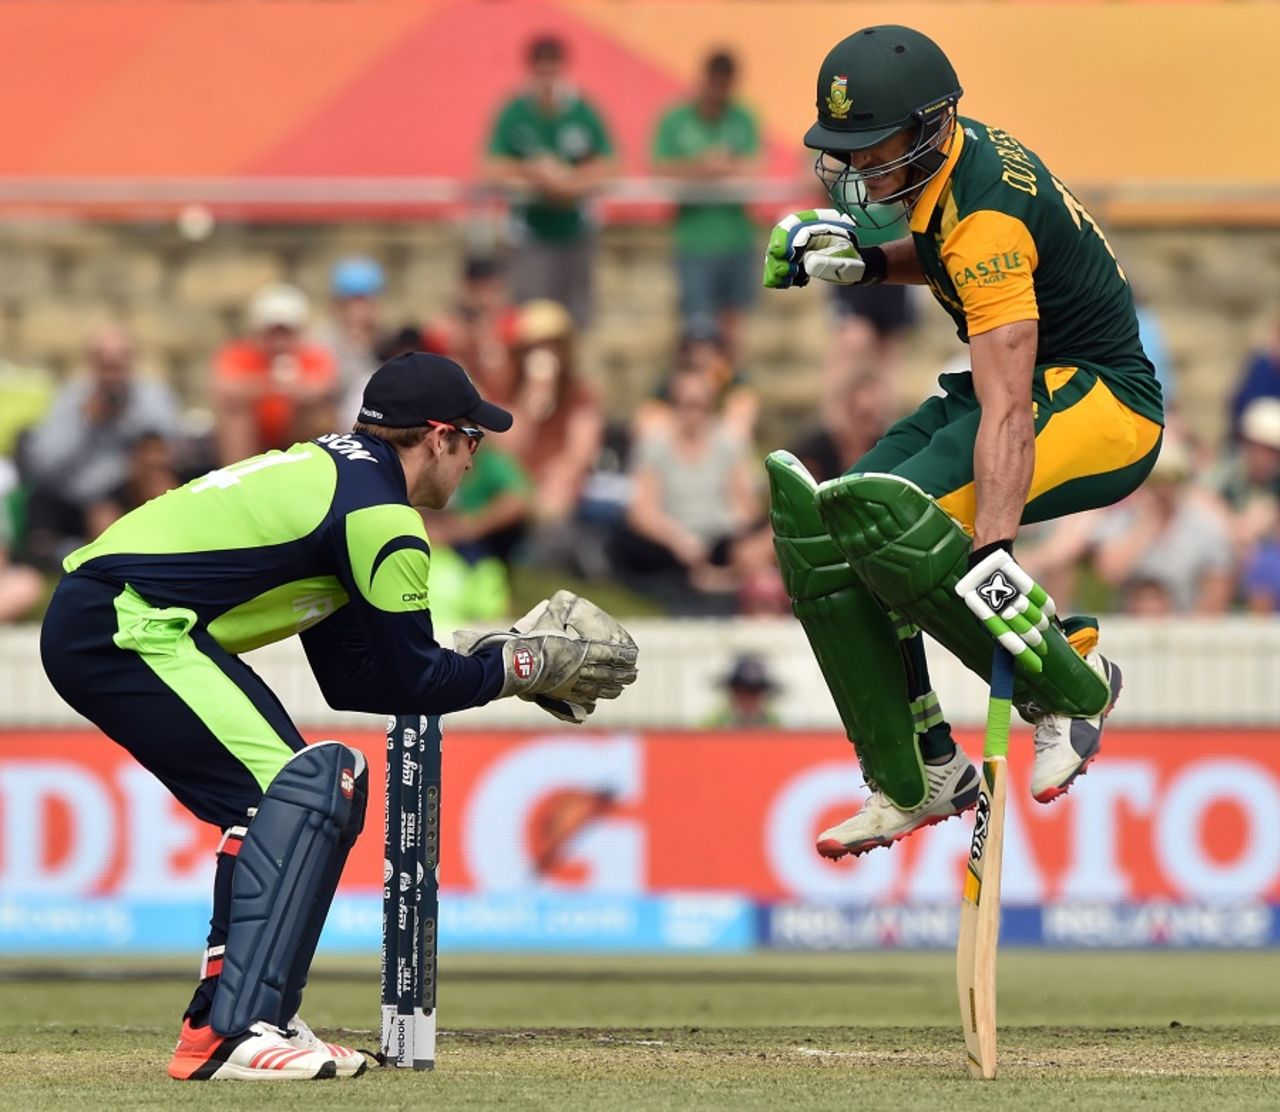 On his toes: Faf du Plessis jumps up to avoid a throw,  Ireland v South Africa, World Cup 2015, Group B, Canberra, March 3, 2015